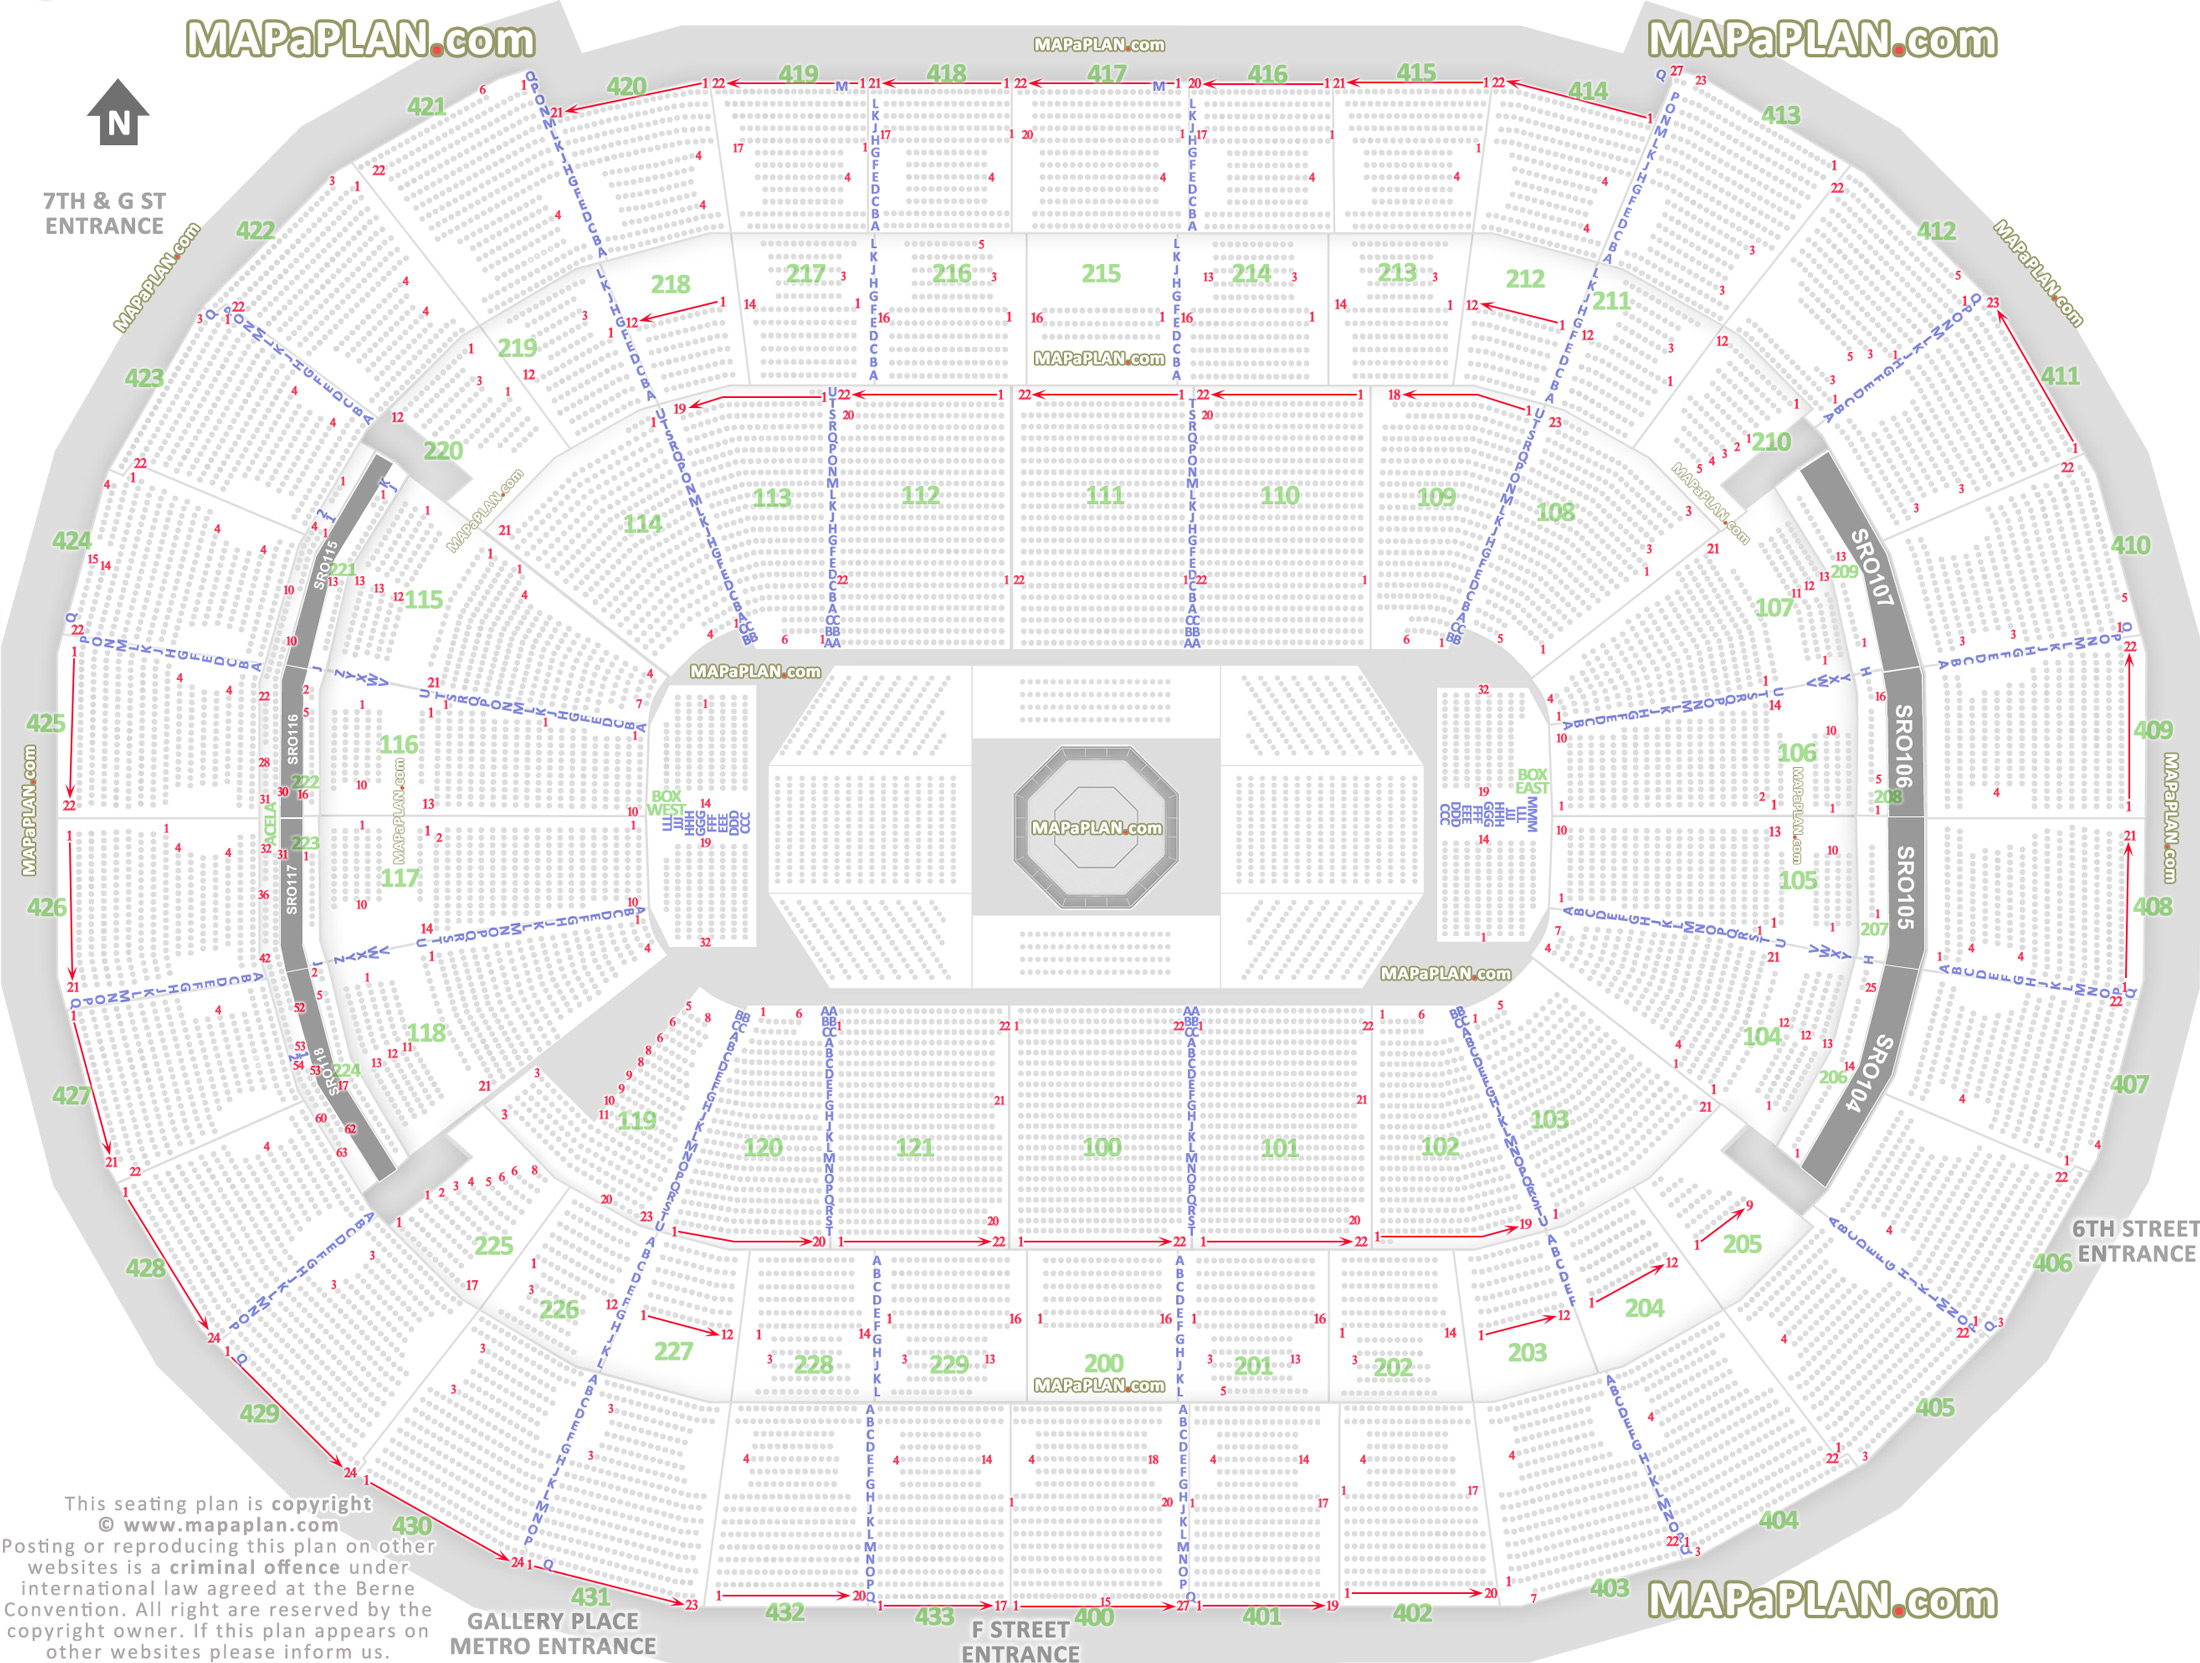 ufc Capital One Arena Center washington dc mma fights fully seated chart viewer box e east w west Washington DC Capital One Arena Center seating chart